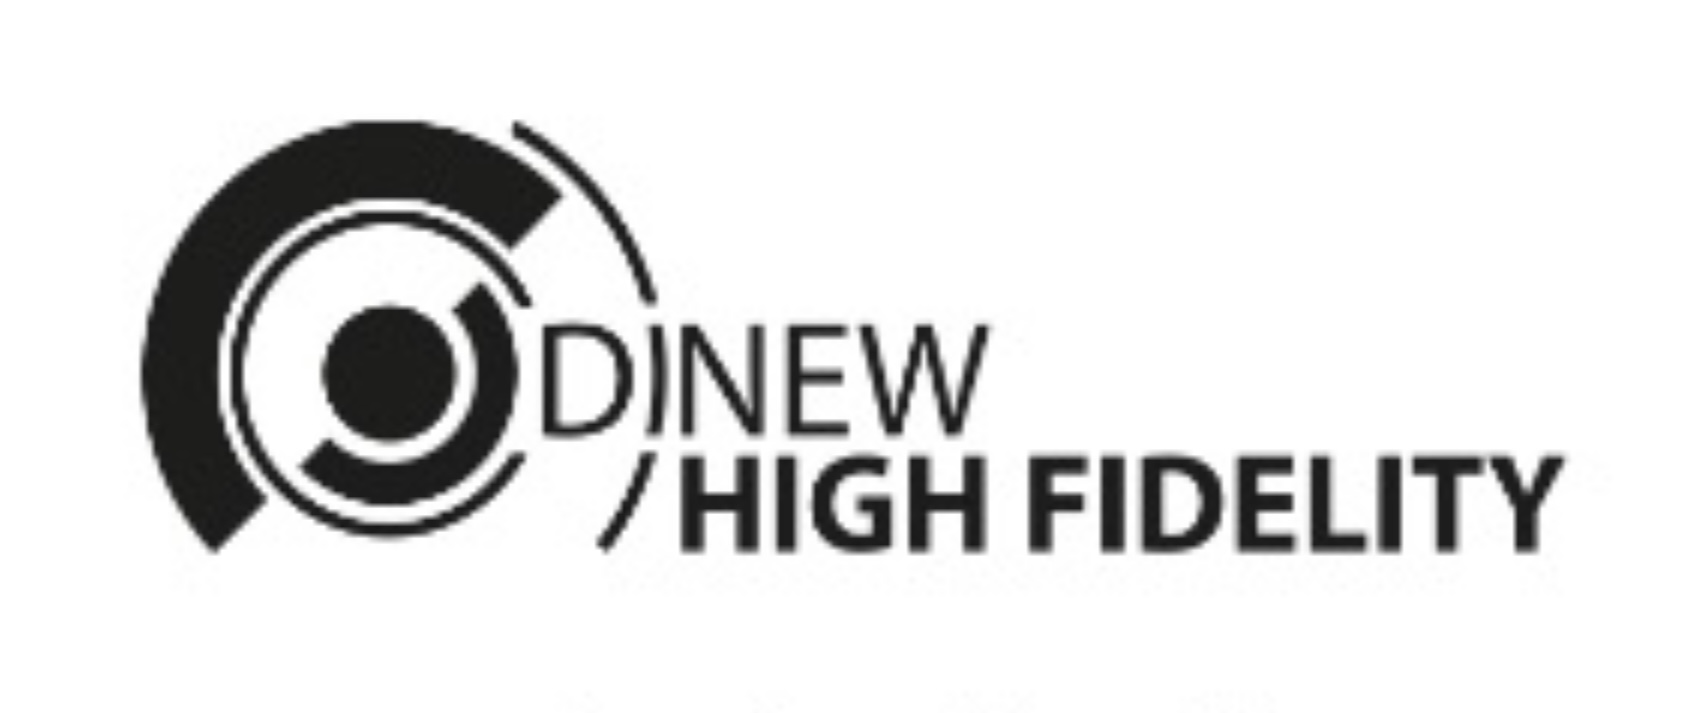 Dinew High Fidelity